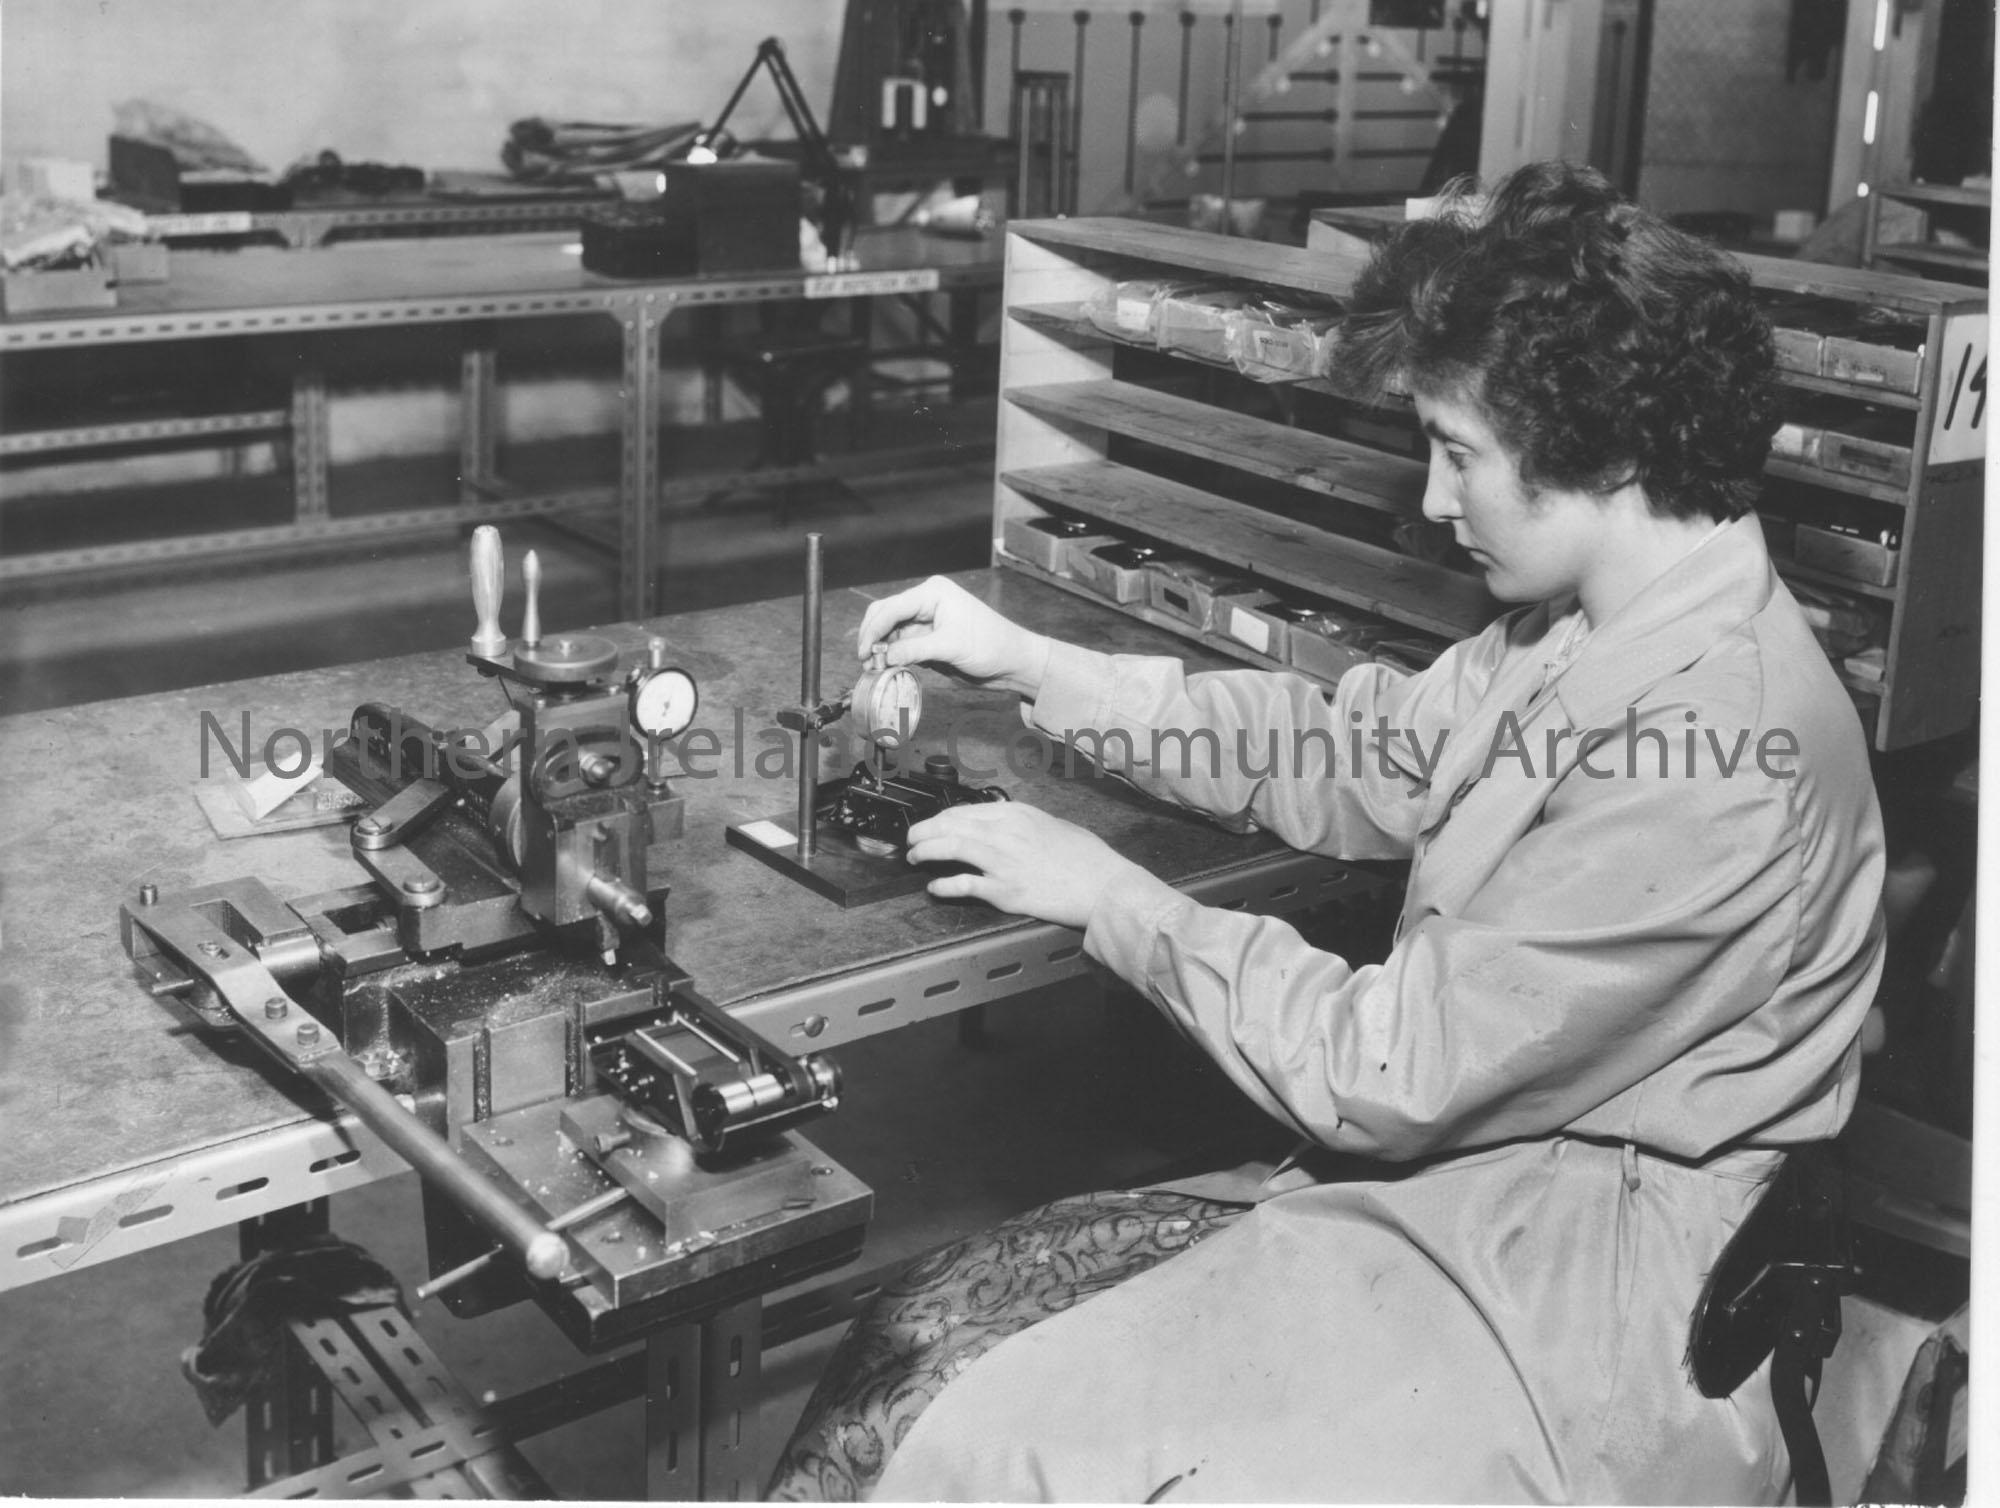 Photograph of machining * checking flange to focal plane distance periflex body- Annie Killy Mosside